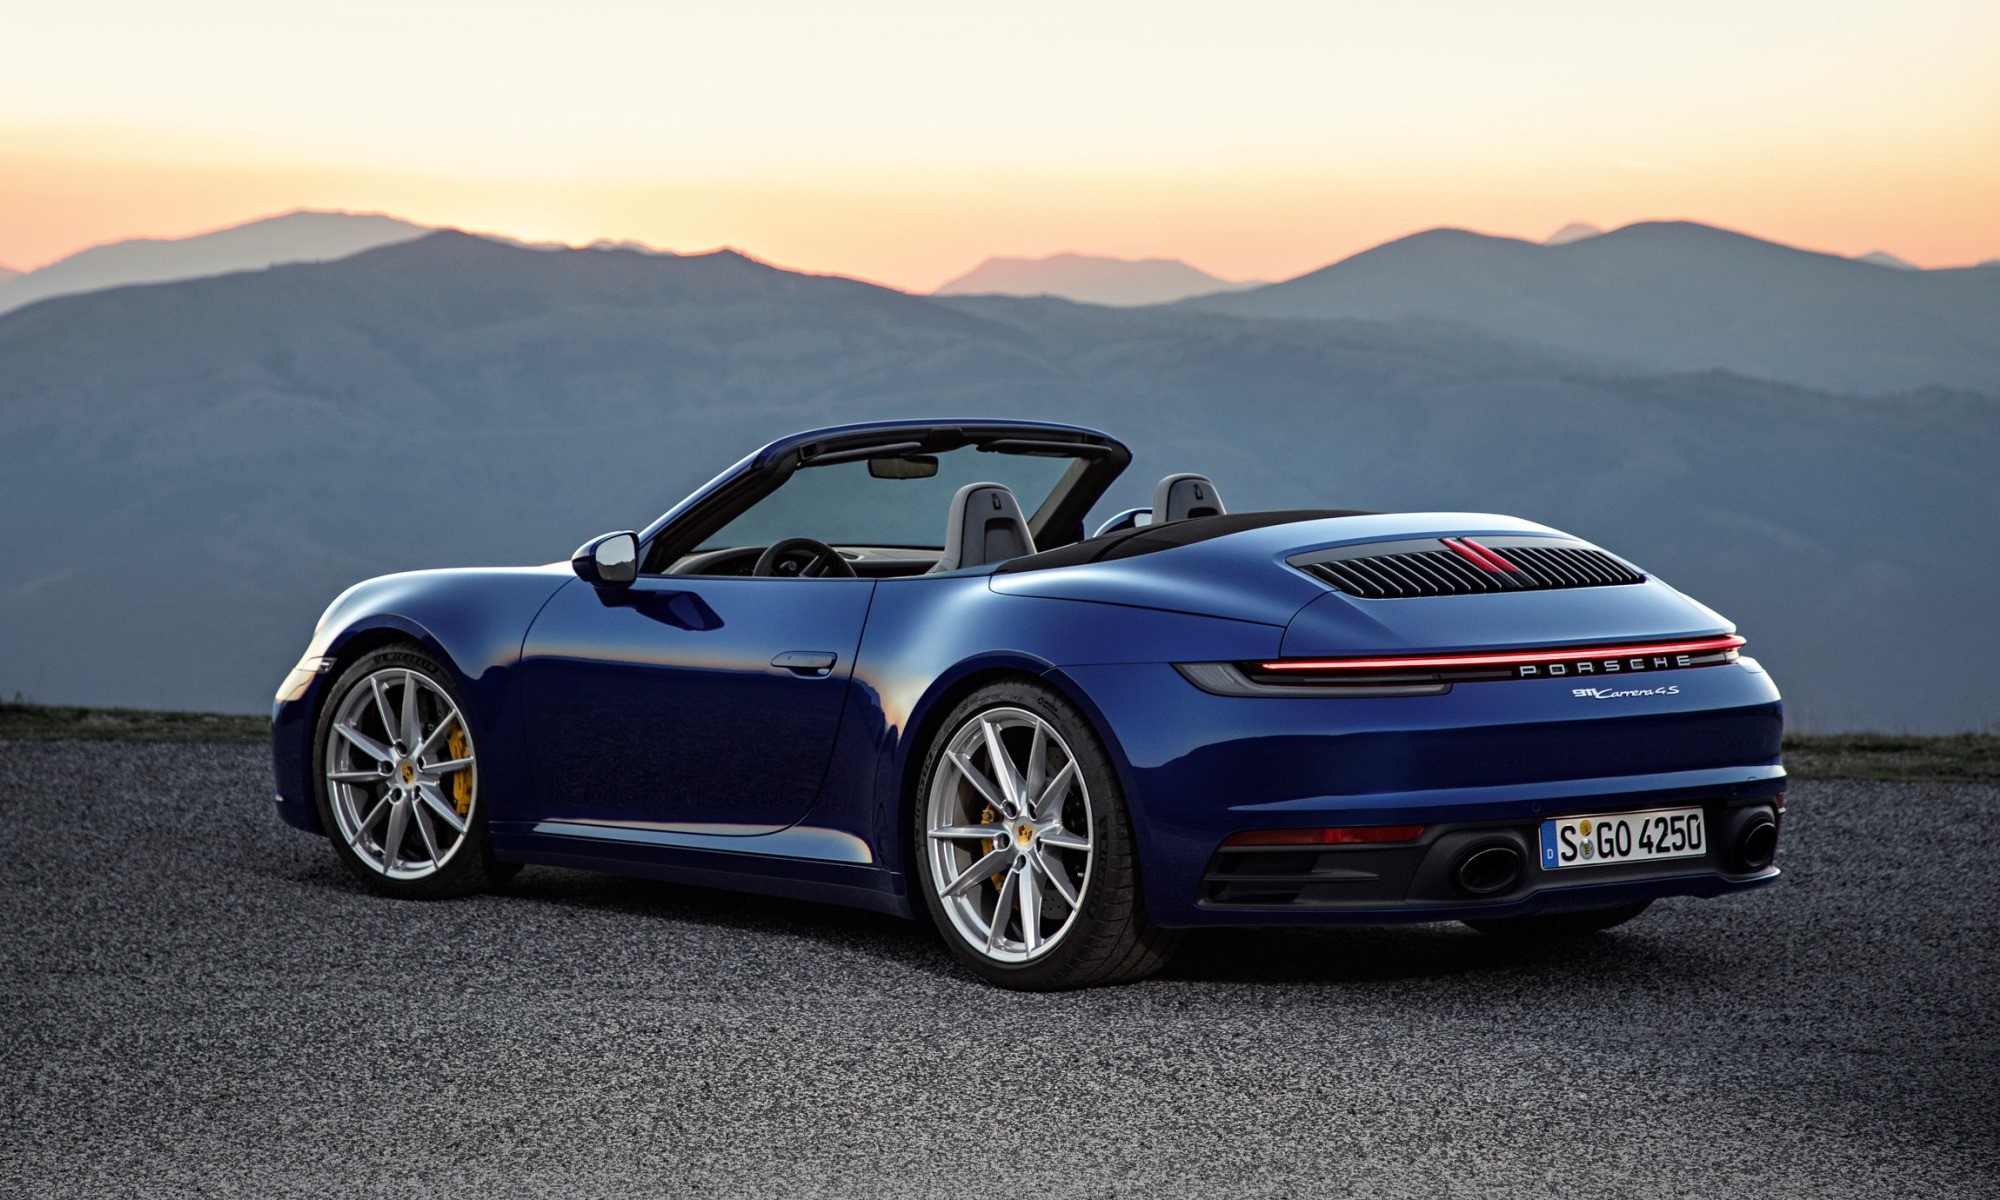 New Porsche 911 Cabriolet debuts only a few weeks after